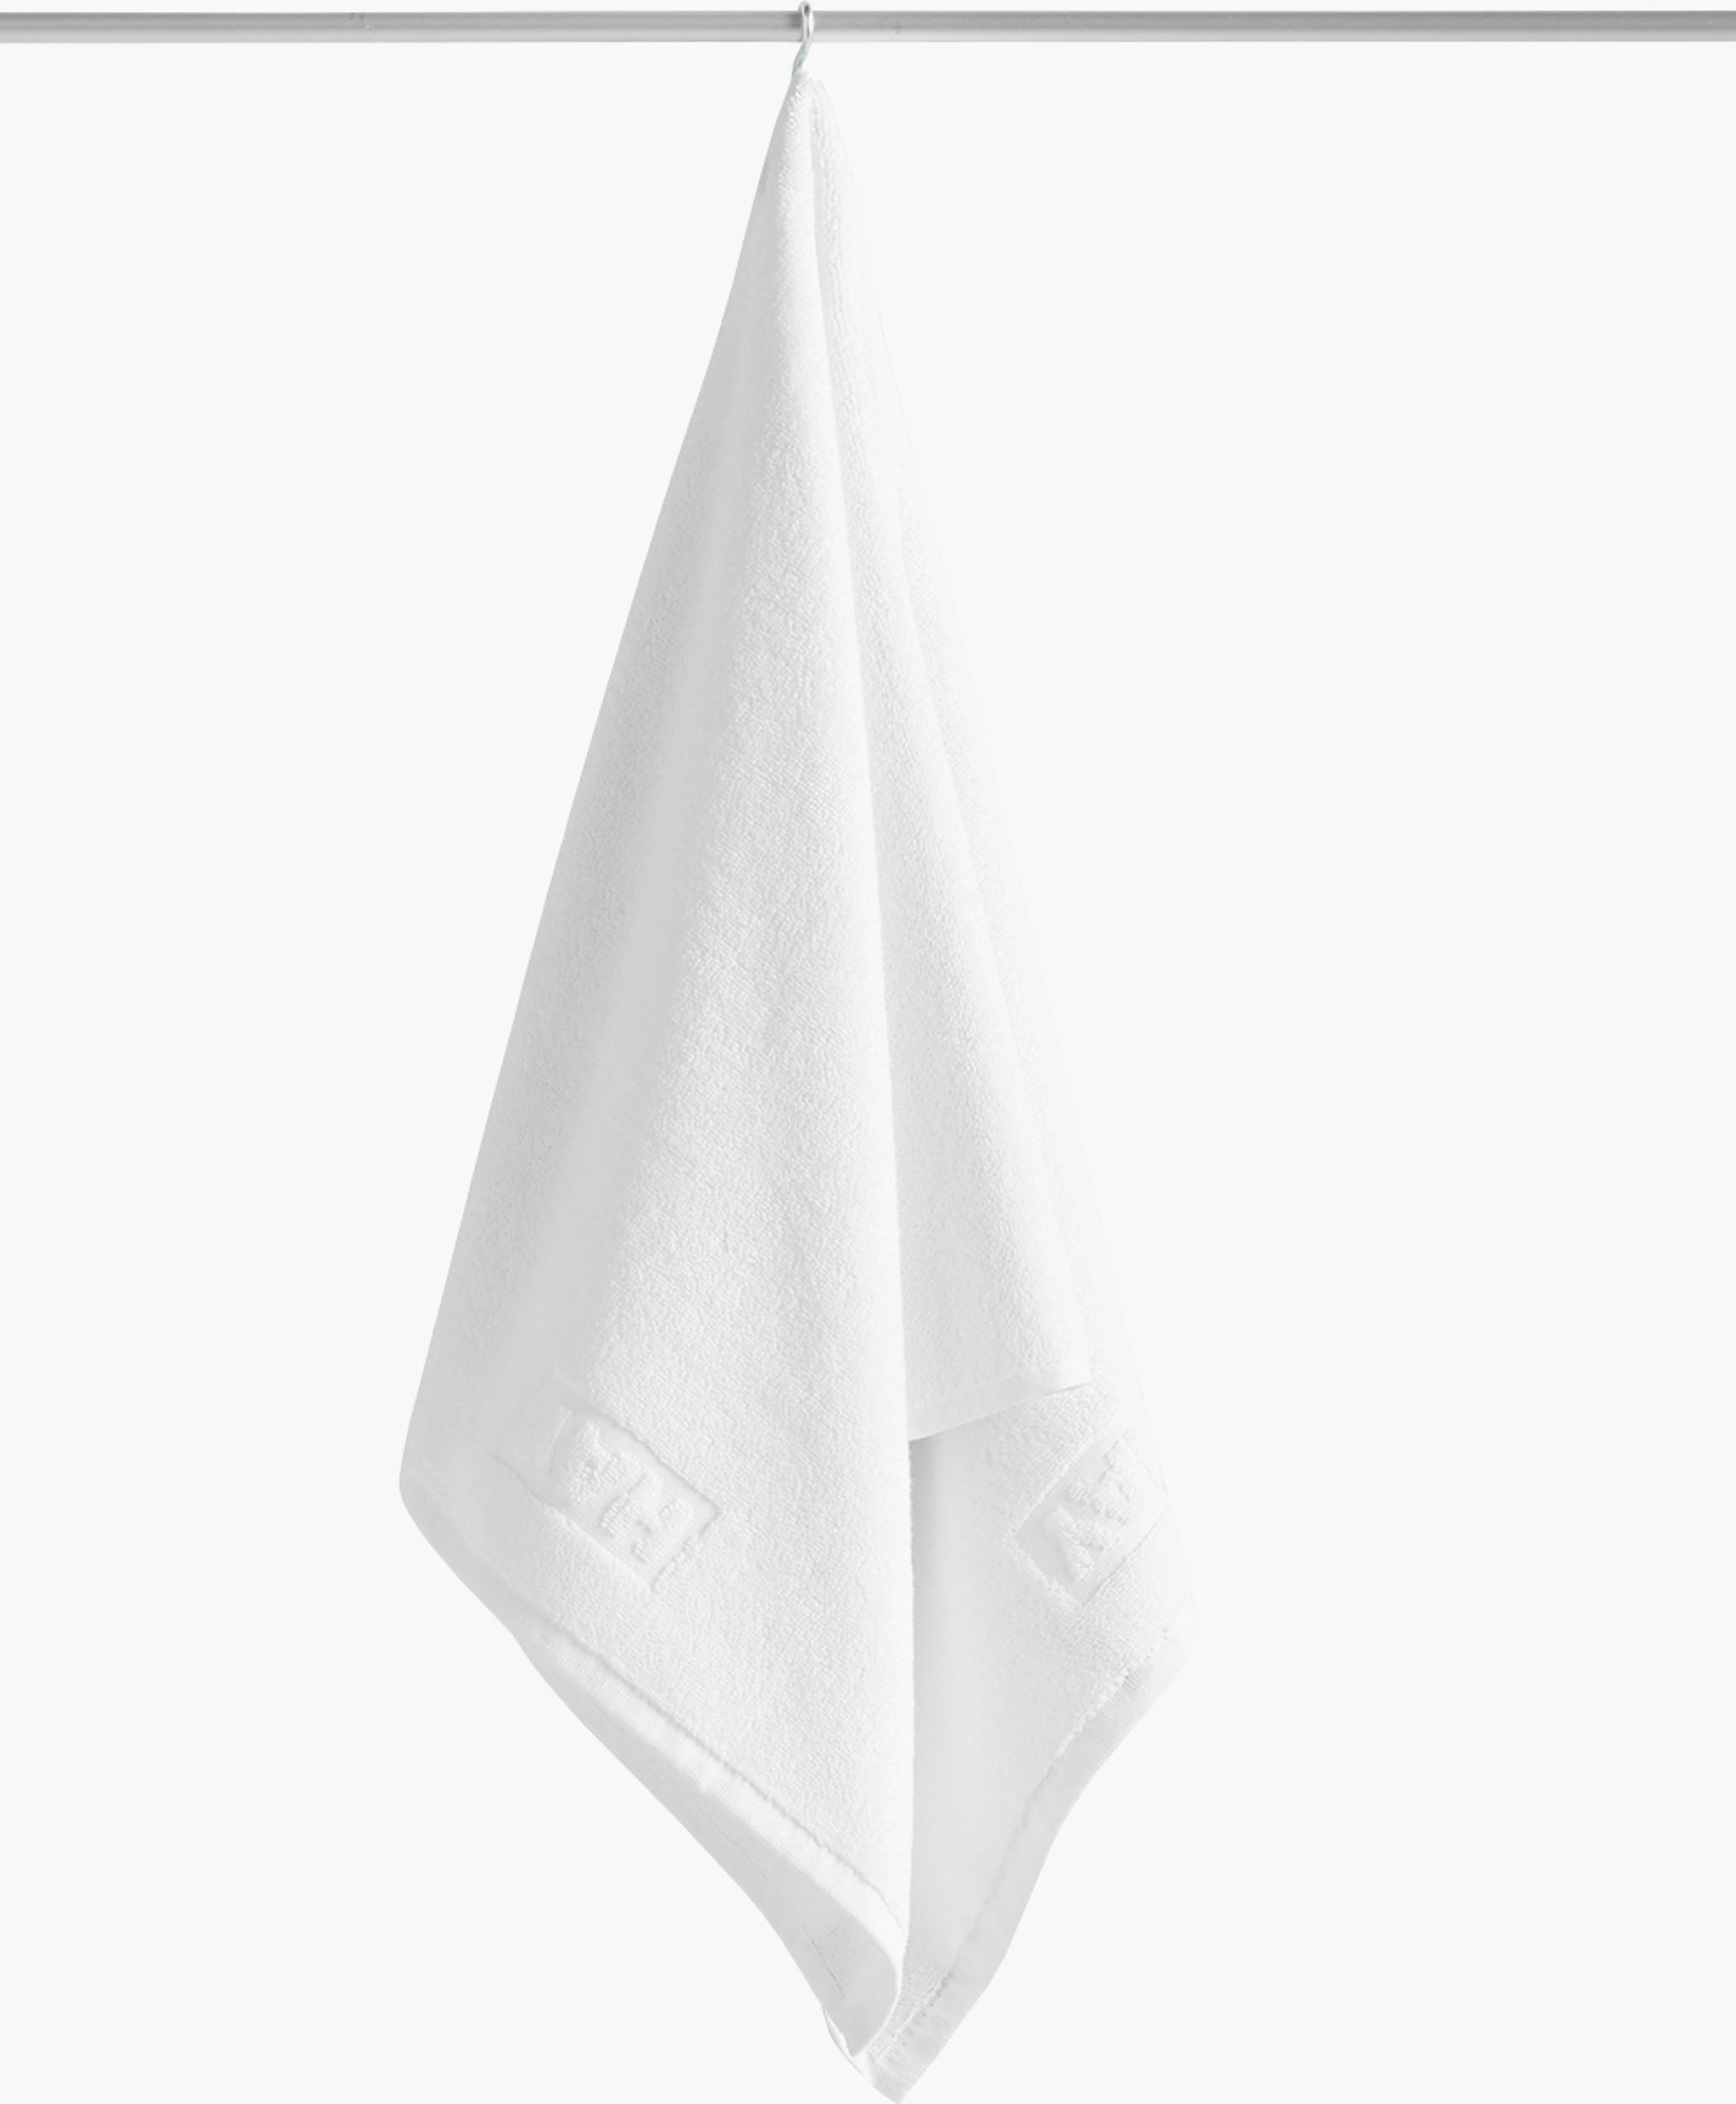 S&B Tea Towels at Design Within Reach